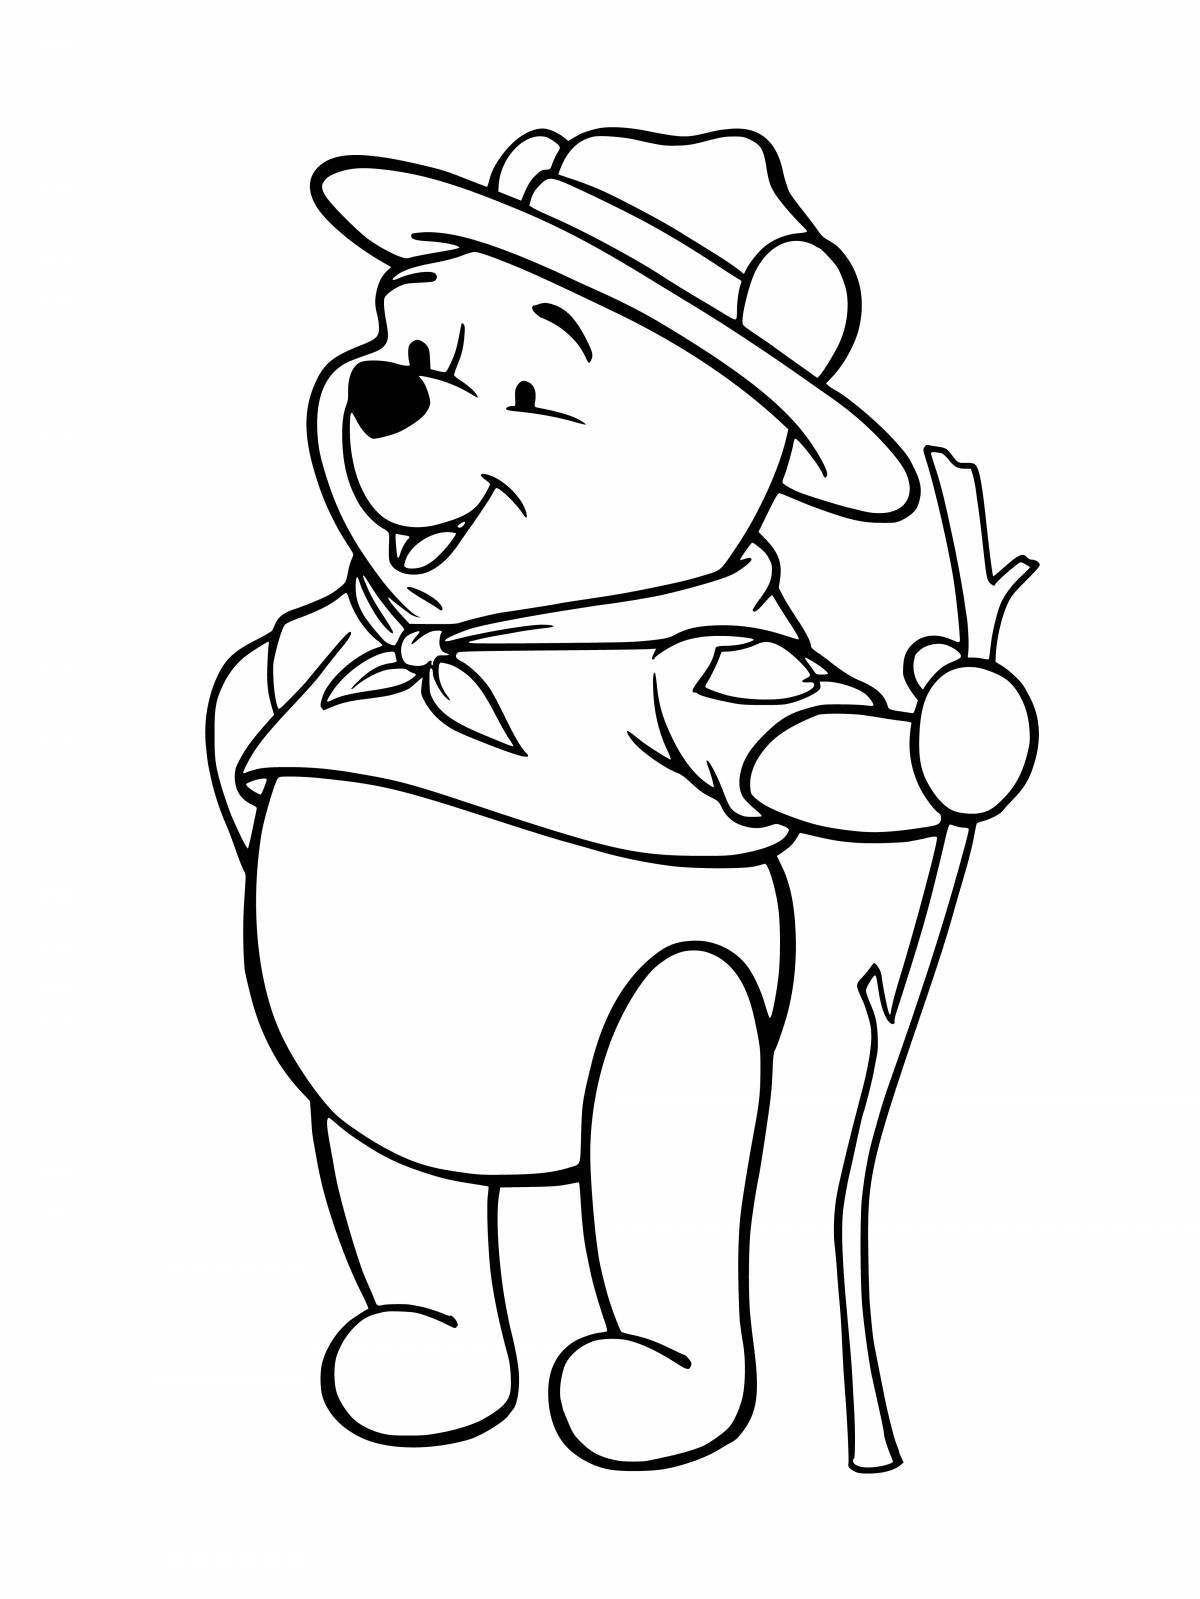 Winnie the pooh bright coloring